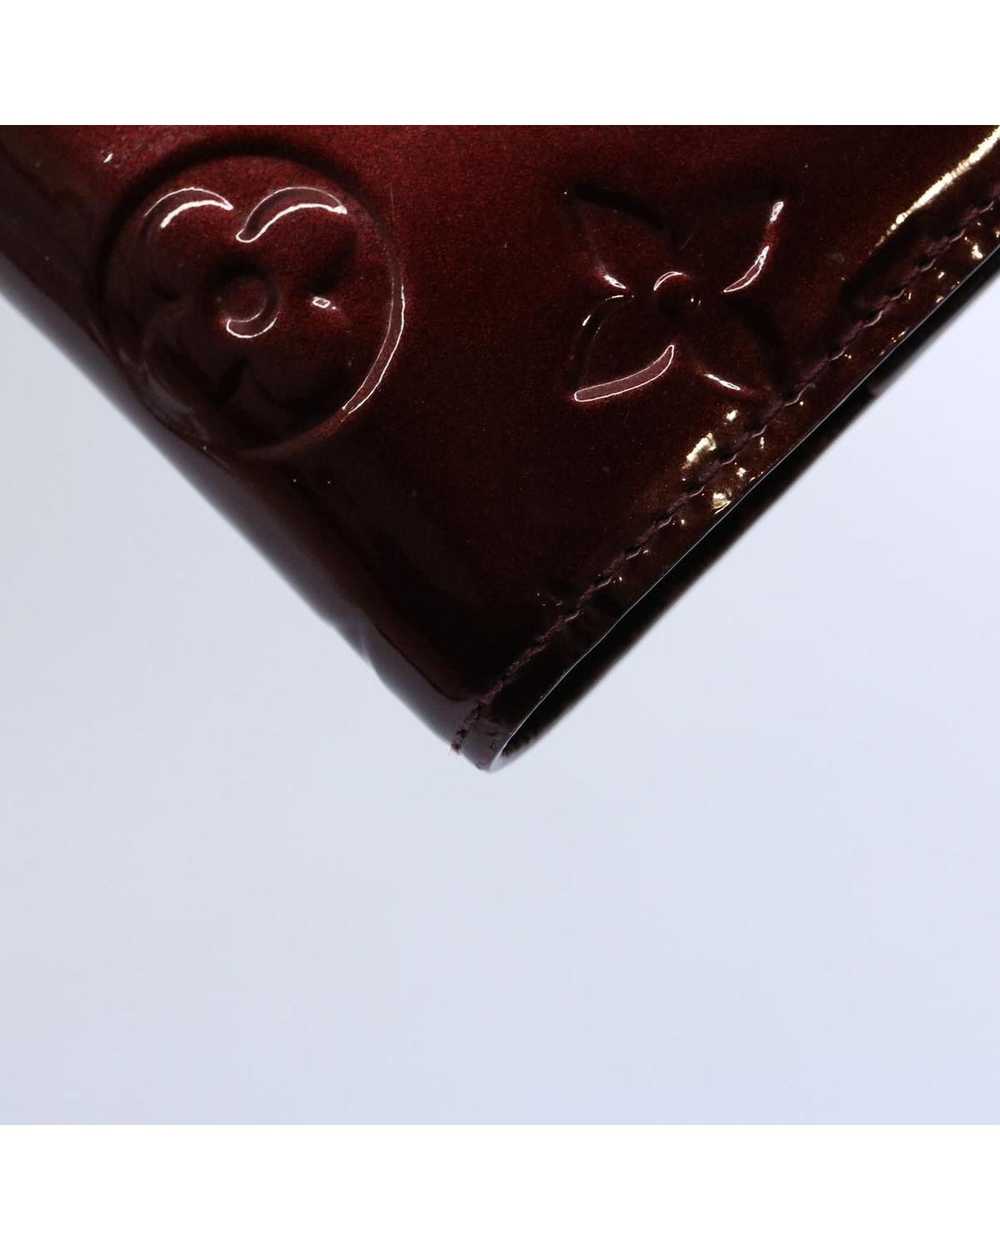 Louis Vuitton Burgundy Patent Leather Diary Cover - image 9